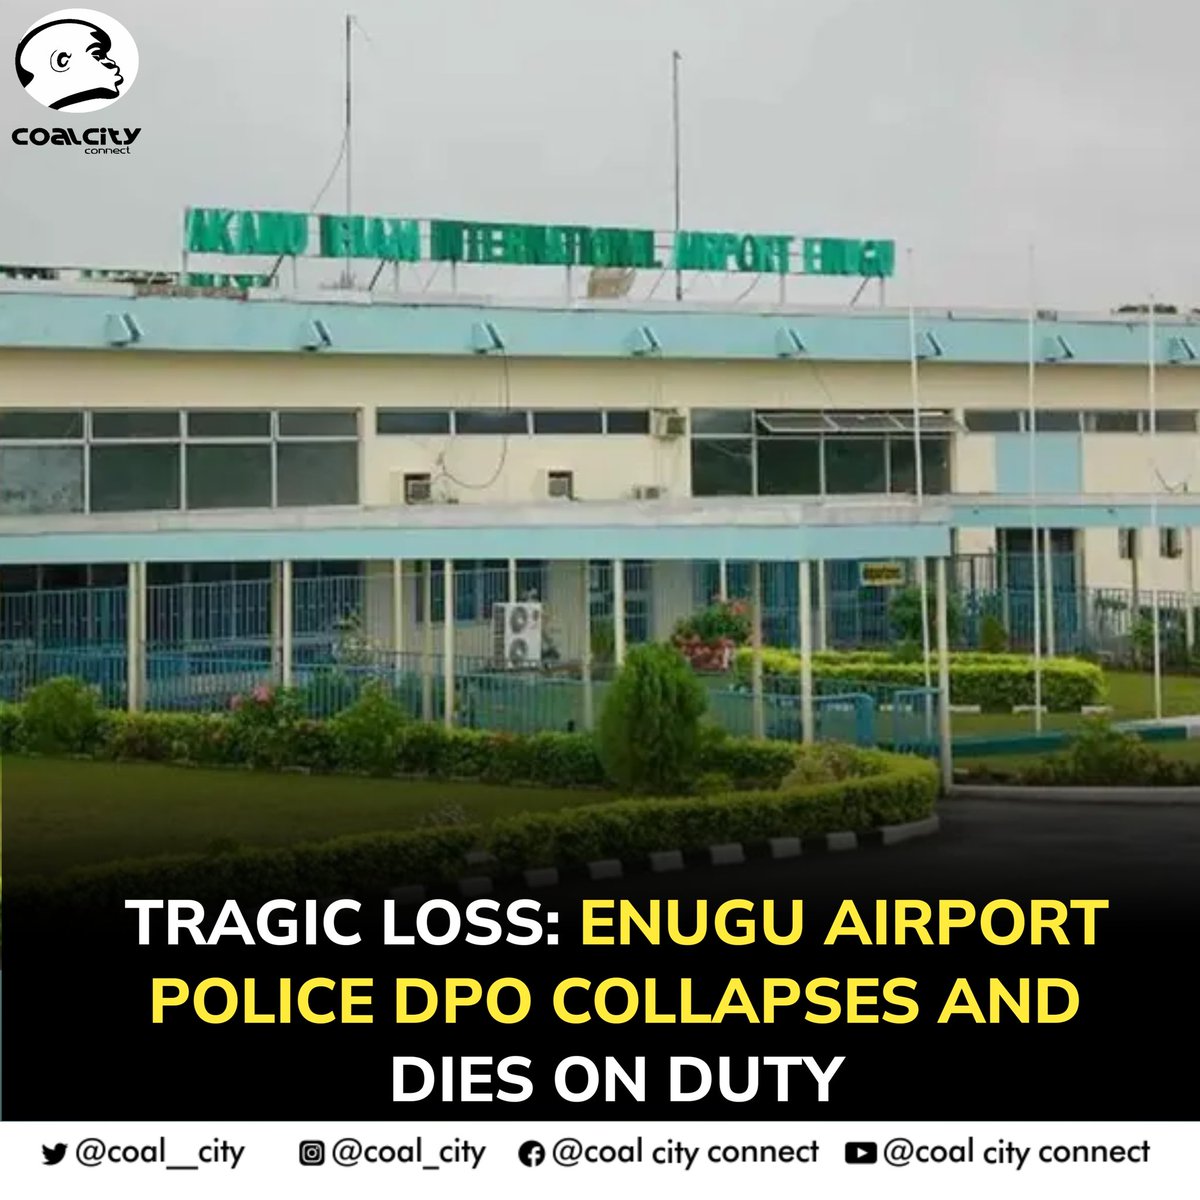 The DPO of the Akanu Ibiam Int'l Airport, Airport Command, reportedly collapsed while on duty on Wednesday and was later pronounced dead at a nearby hospital. The late DPO was swiftly taken to the Annunciation Specialist Hospital in Emene, Enugu, where medical personnel worked